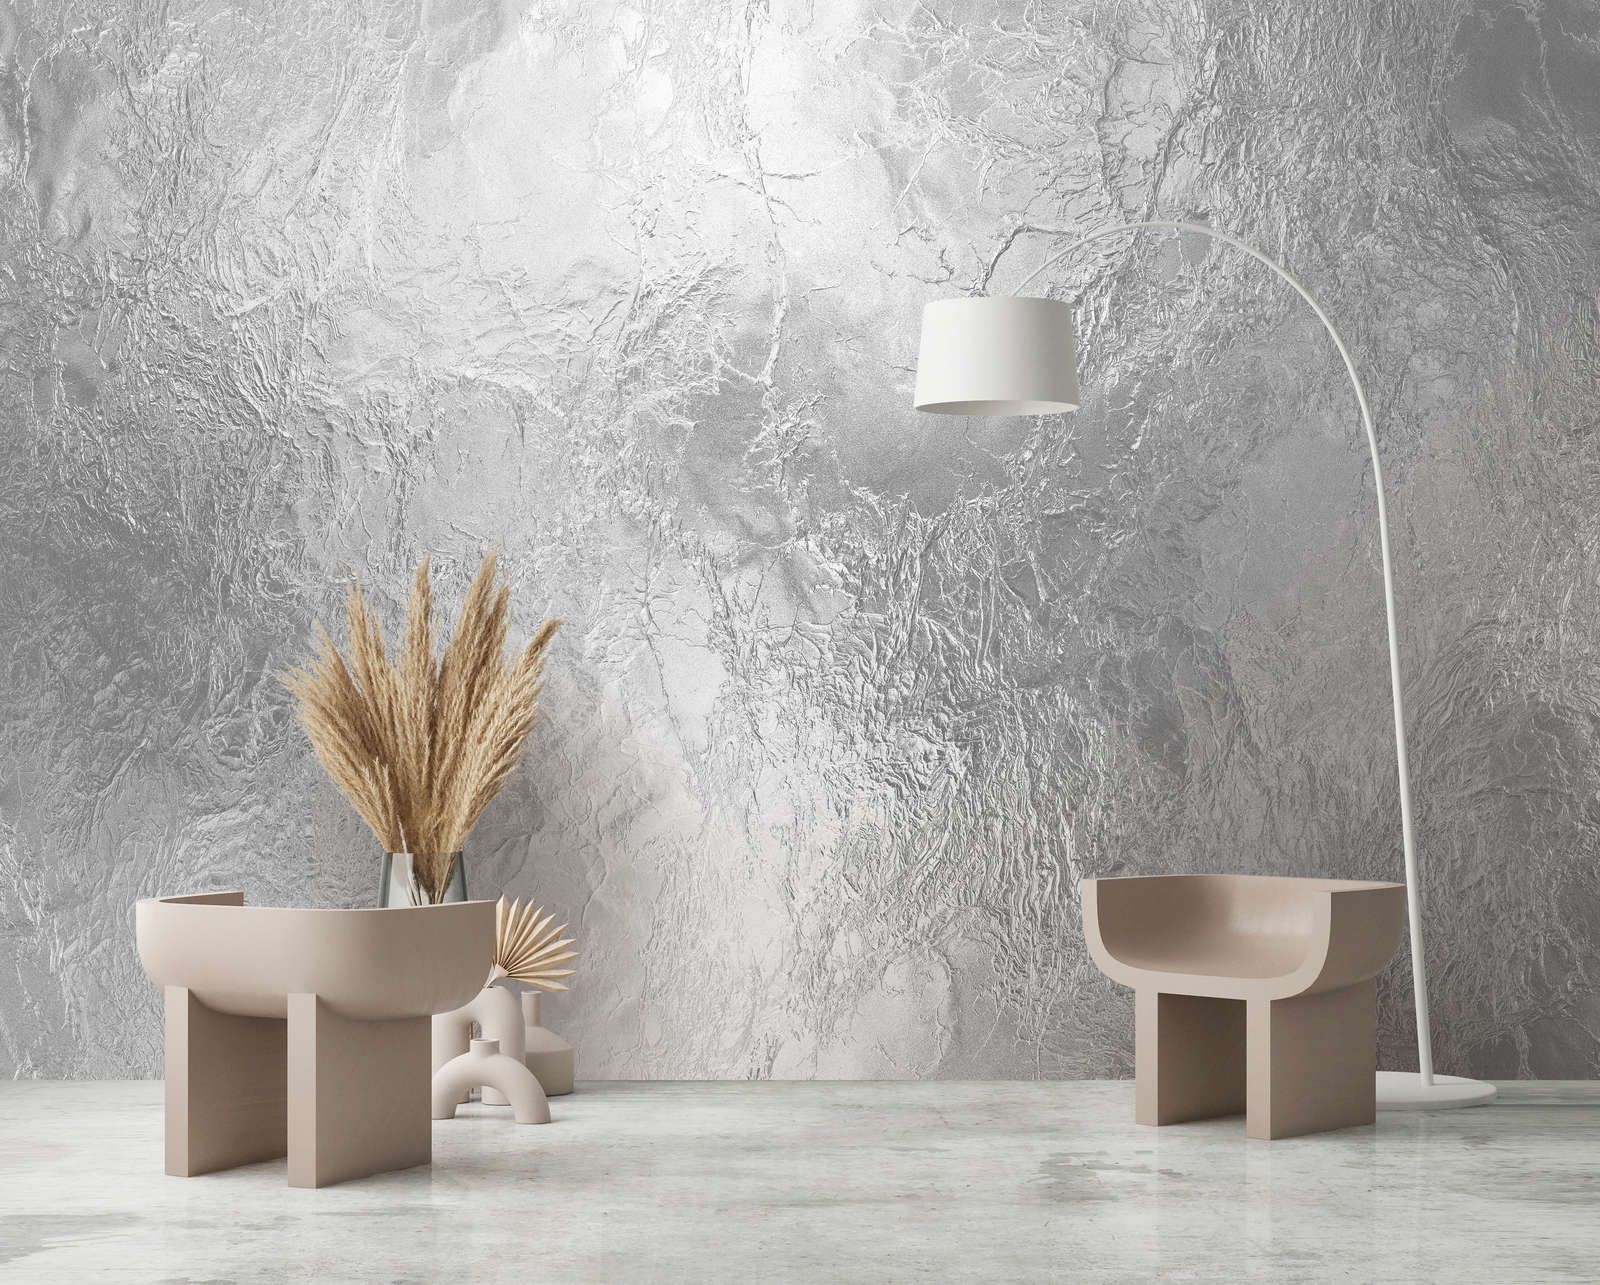             Photo wallpaper »silvie« - ice layer from below - silver grey | light textured non-woven
        